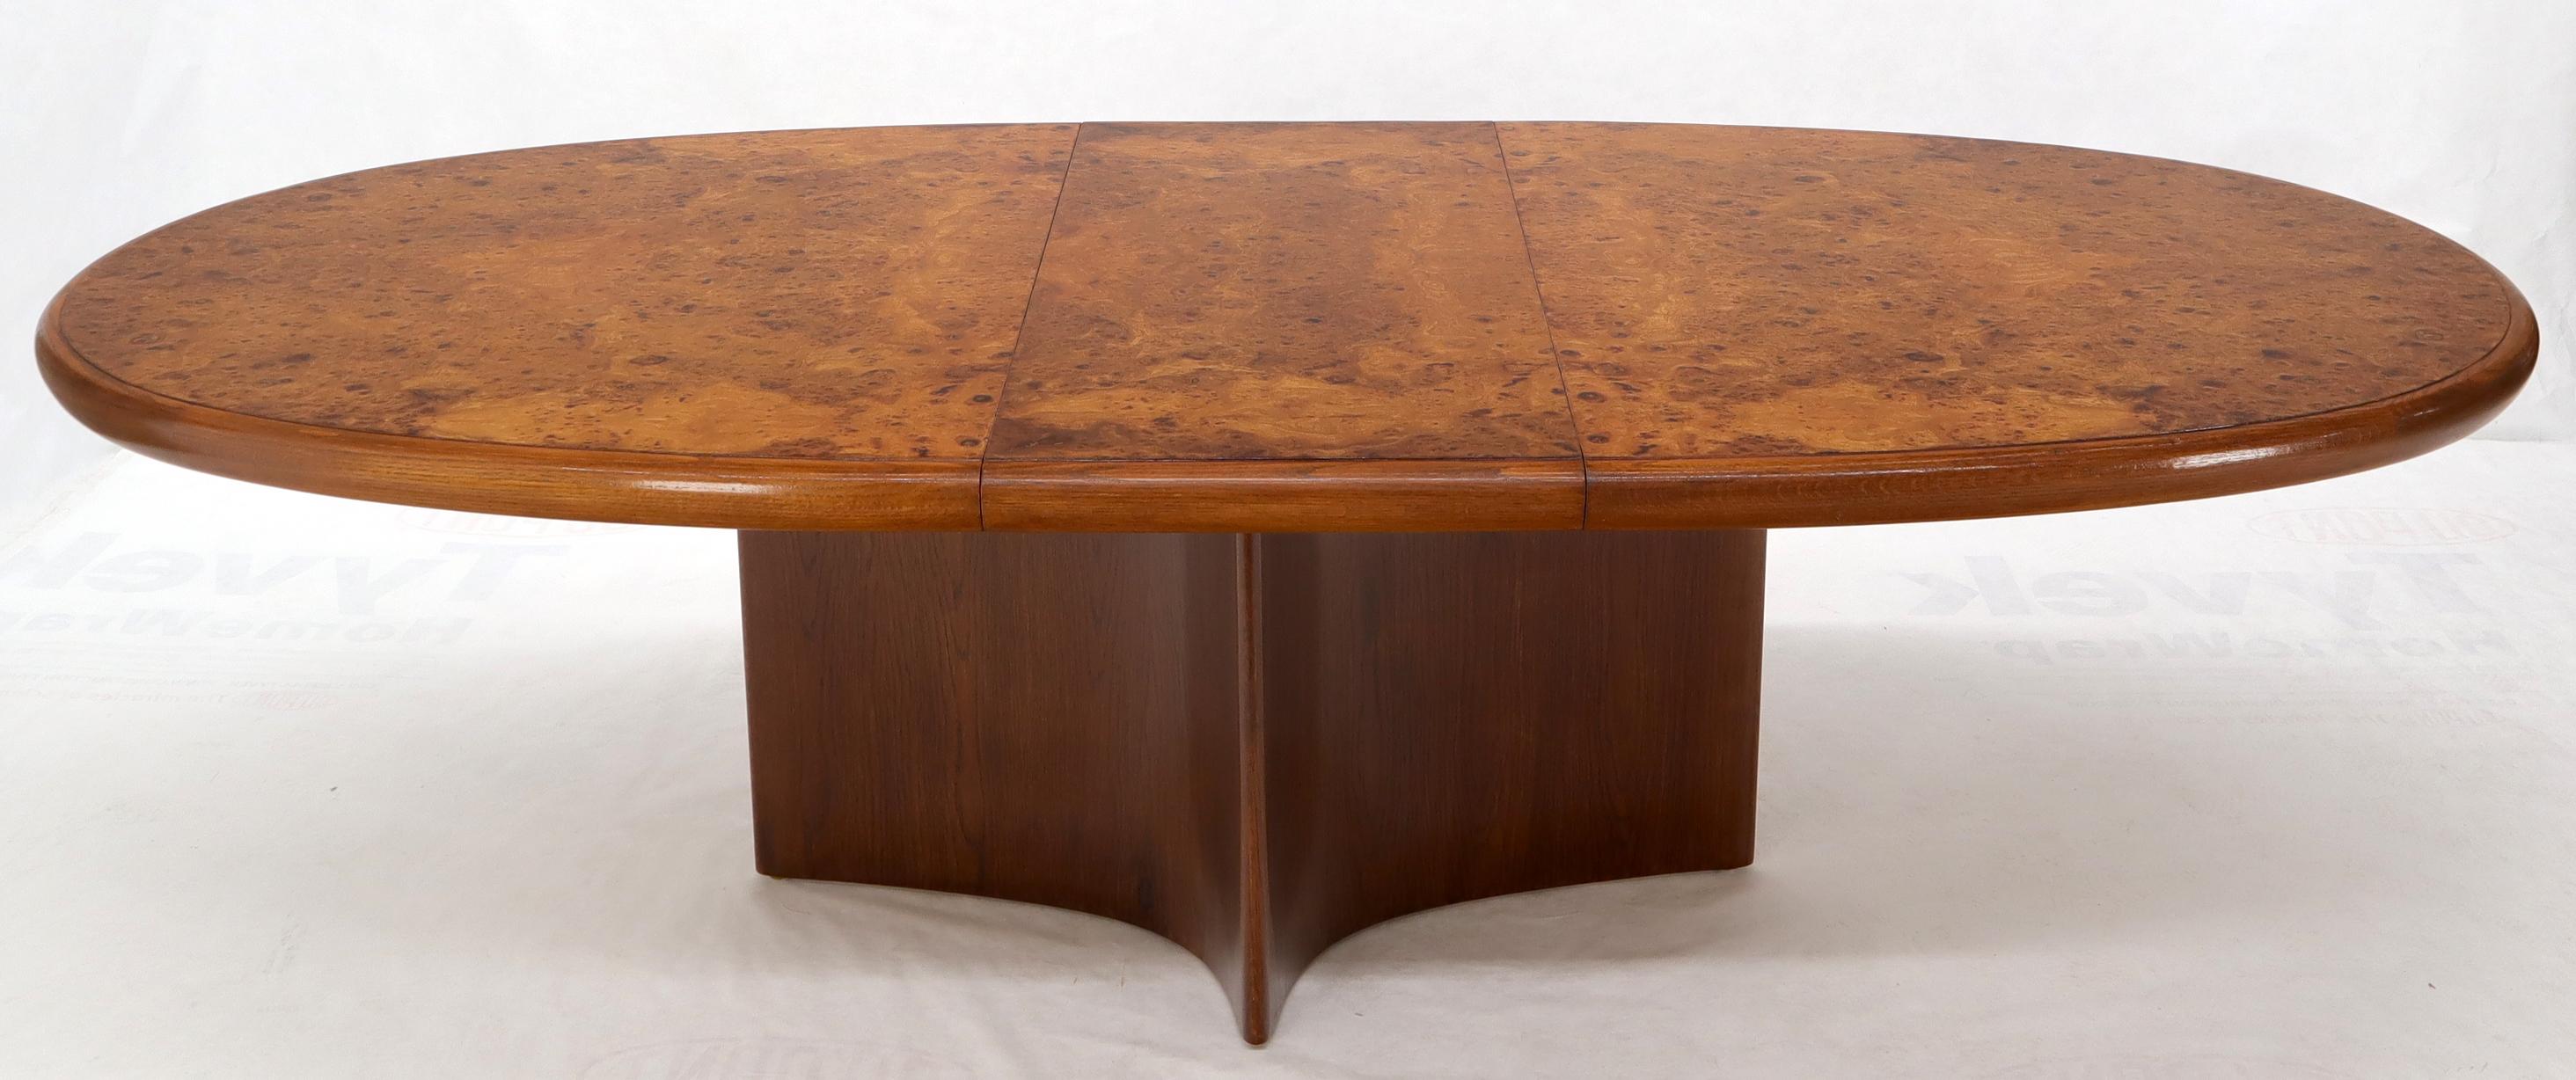 Mid-Century Modern oval burl wood dining or conference table by Vladimir Kagan. Closed measures 84